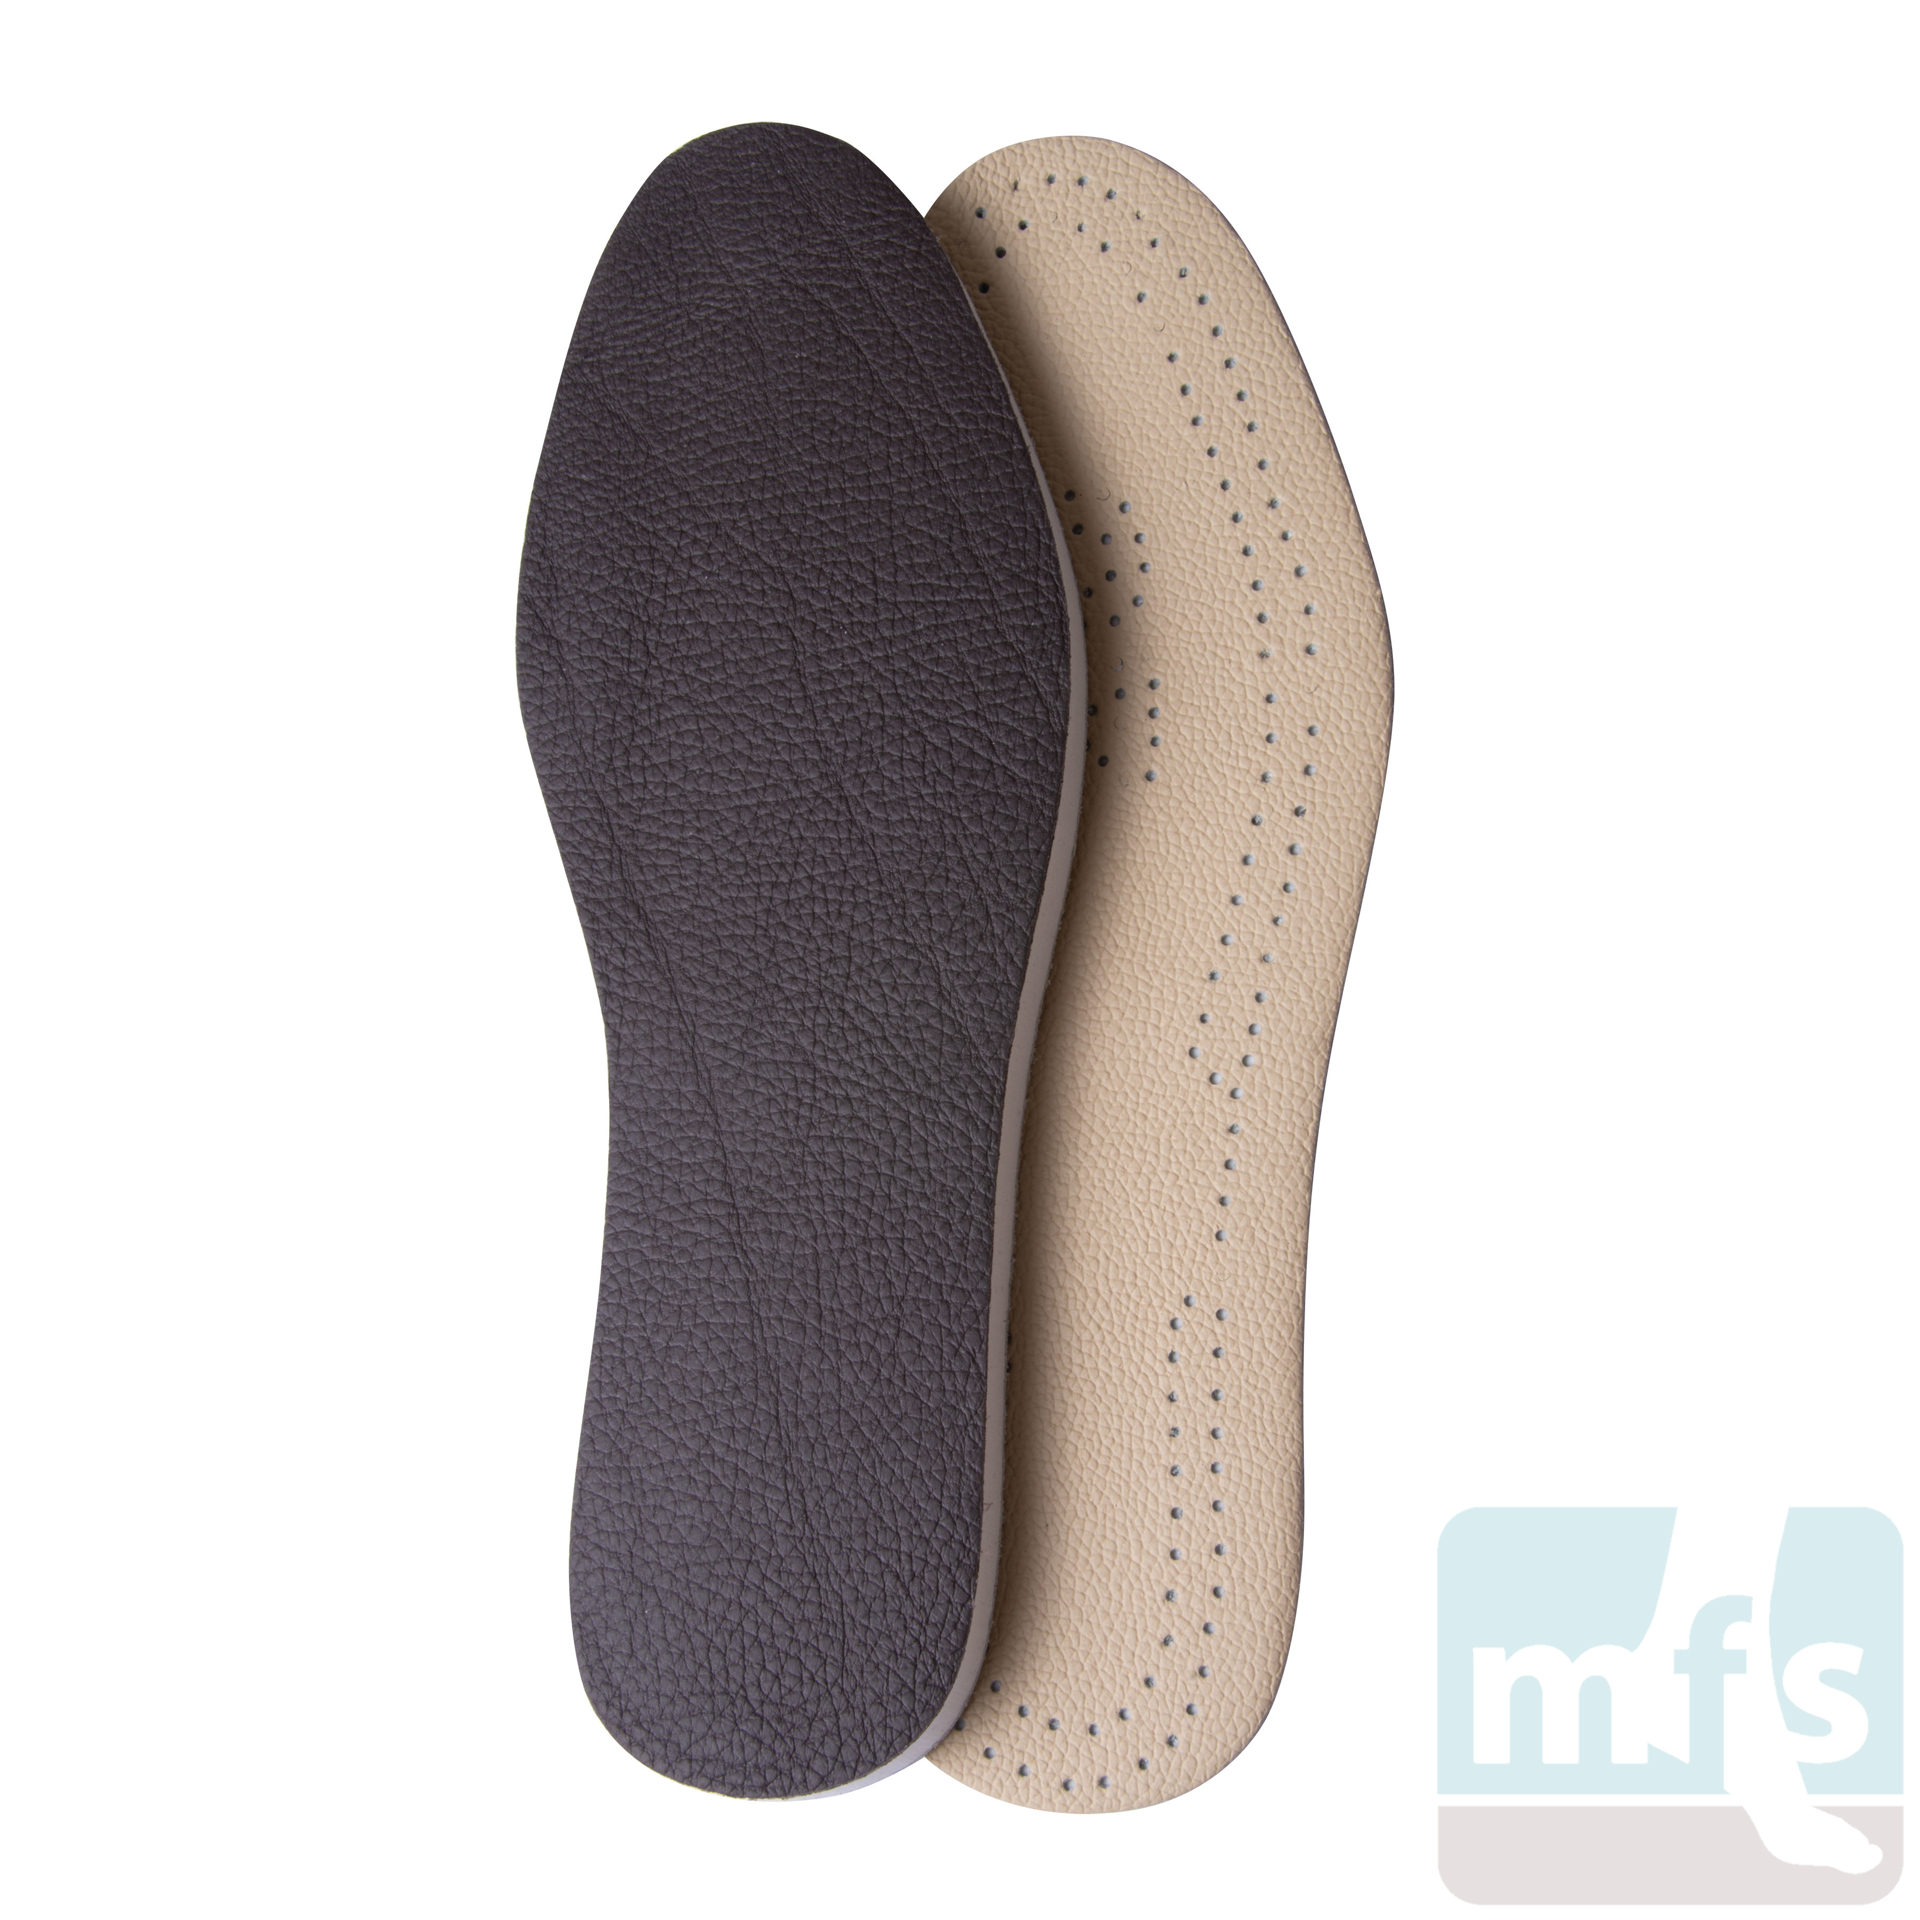 Lateral Sole Wedge Insoles - 1/2